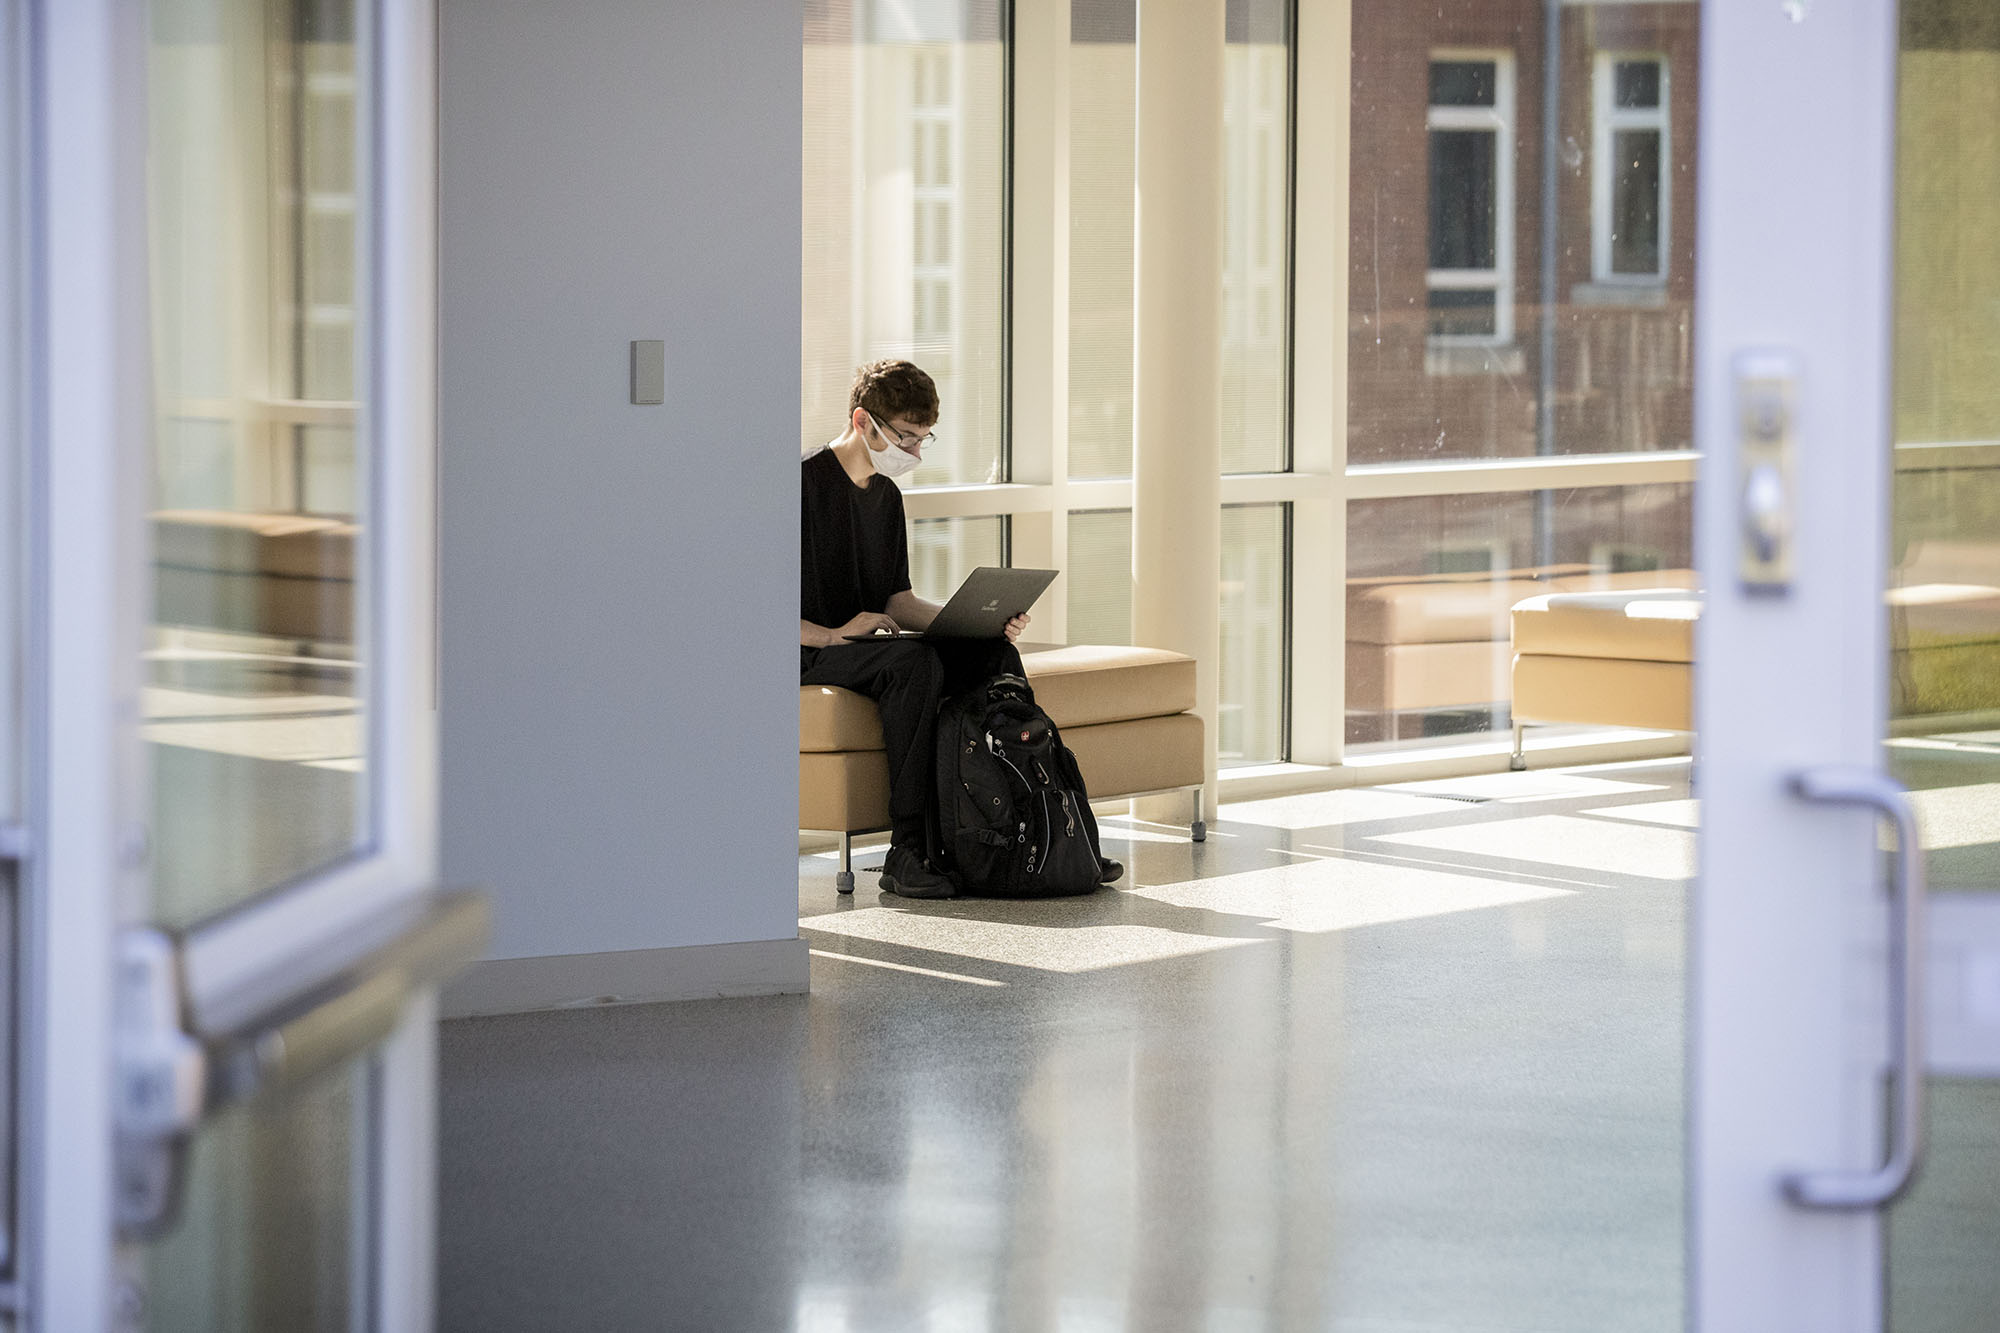 Student sitting in the hallway on a sofa working on their computer